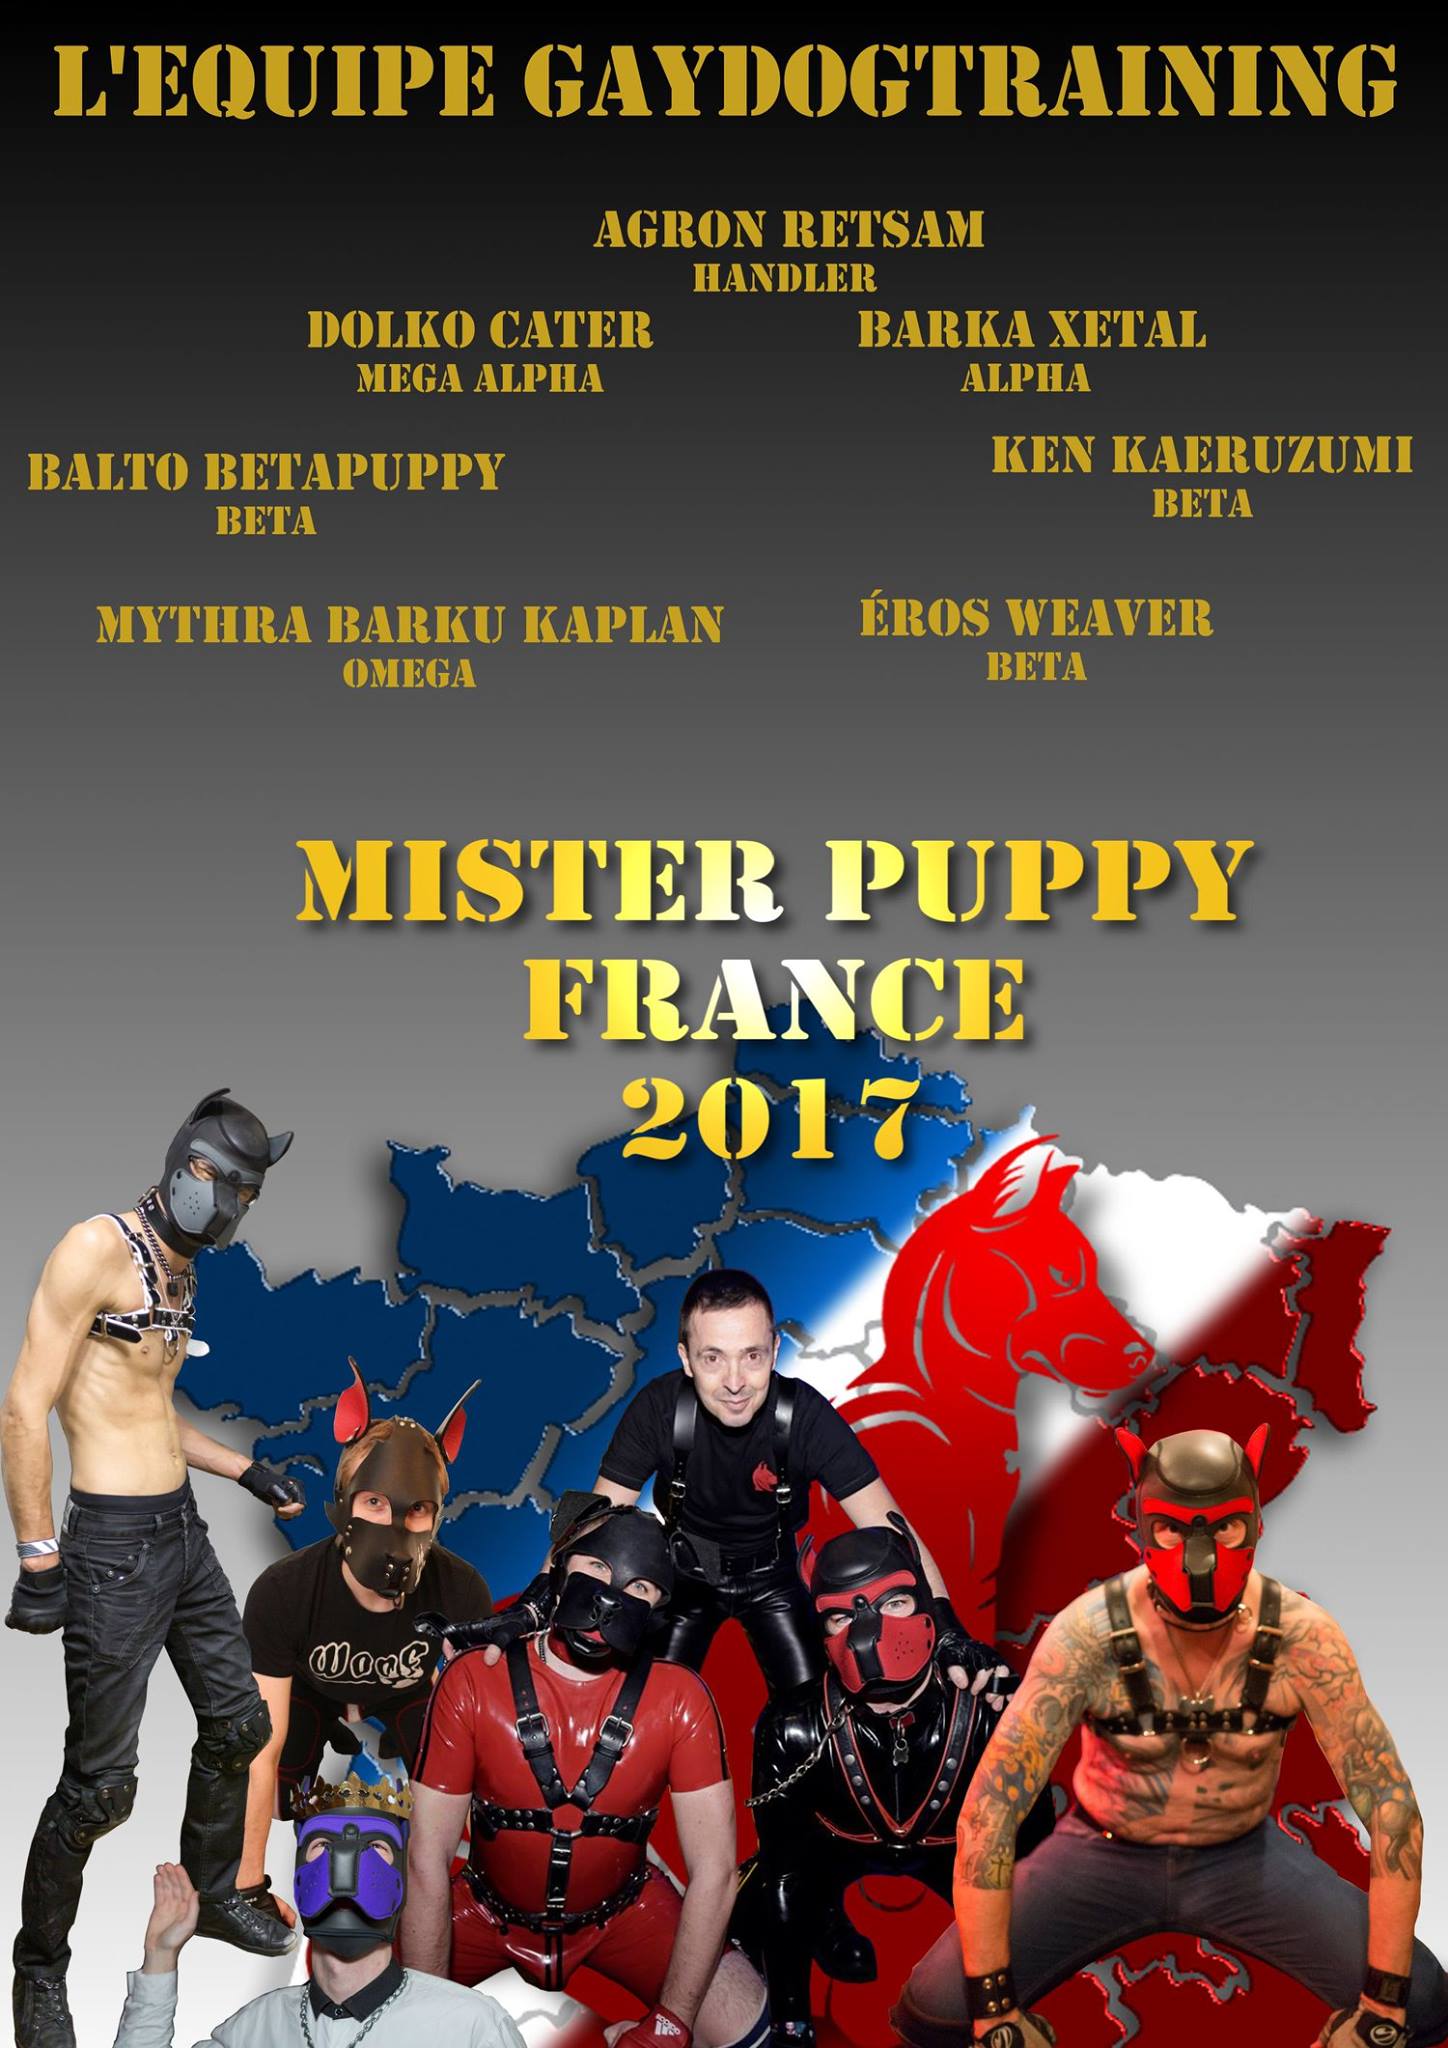 2017-Mister-Puppy-France-09052017